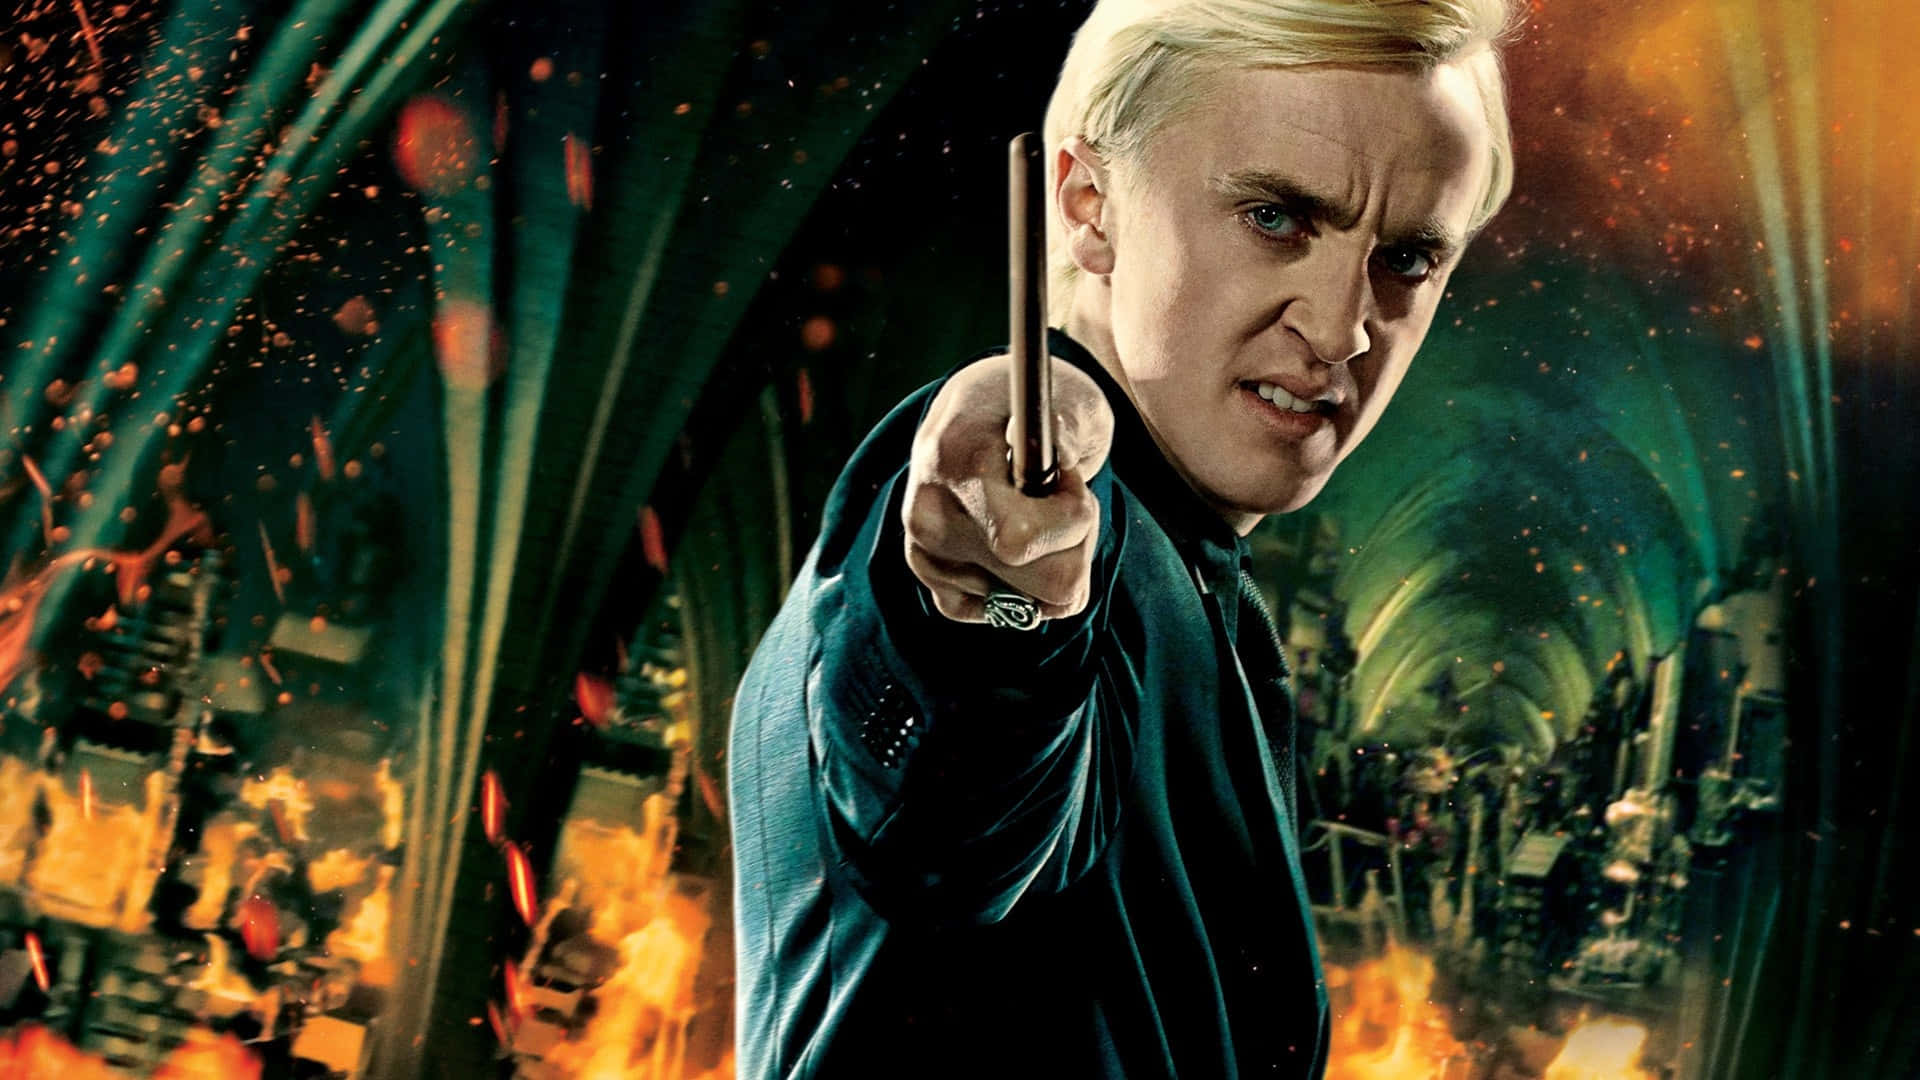 Draco Malfoy from the Harry Potter Series